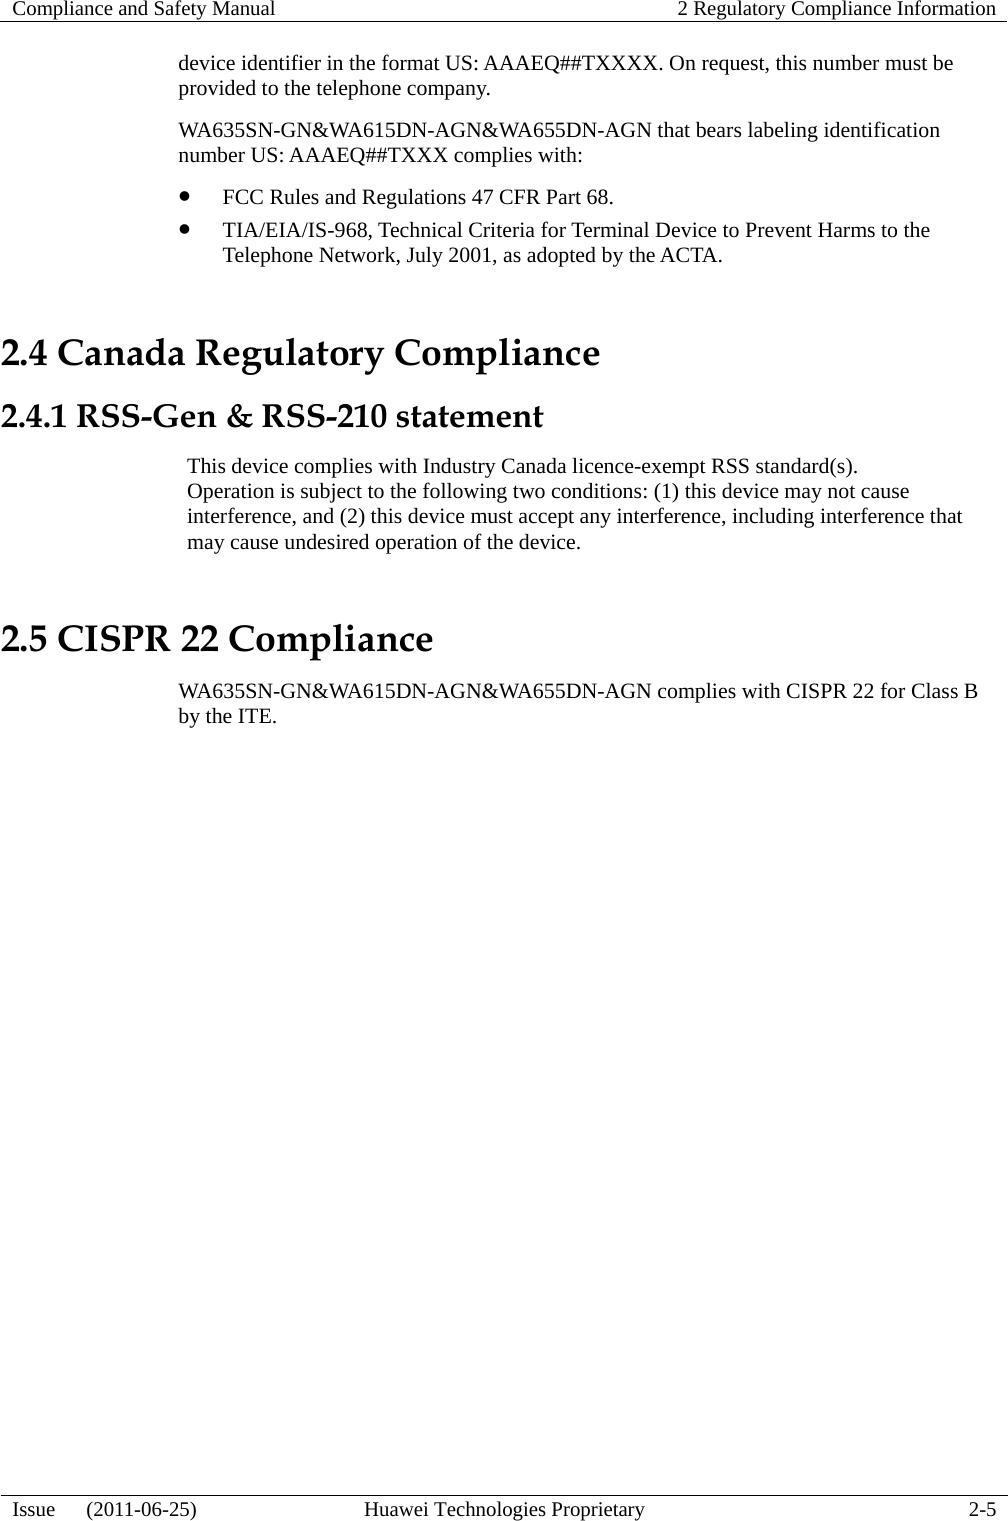 Compliance and Safety Manual  2 Regulatory Compliance Information  Issue   (2011-06-25)  Huawei Technologies Proprietary  2-5 device identifier in the format US: AAAEQ##TXXXX. On request, this number must be provided to the telephone company. WA635SN-GN&amp;WA615DN-AGN&amp;WA655DN-AGN that bears labeling identification number US: AAAEQ##TXXX complies with: z FCC Rules and Regulations 47 CFR Part 68. z TIA/EIA/IS-968, Technical Criteria for Terminal Device to Prevent Harms to the Telephone Network, July 2001, as adopted by the ACTA. 2.4 Canada Regulatory Compliance 2.4.1 RSS-Gen &amp; RSS-210 statement This device complies with Industry Canada licence-exempt RSS standard(s). Operation is subject to the following two conditions: (1) this device may not cause interference, and (2) this device must accept any interference, including interference that may cause undesired operation of the device. 2.5 CISPR 22 Compliance WA635SN-GN&amp;WA615DN-AGN&amp;WA655DN-AGN complies with CISPR 22 for Class B by the ITE. 